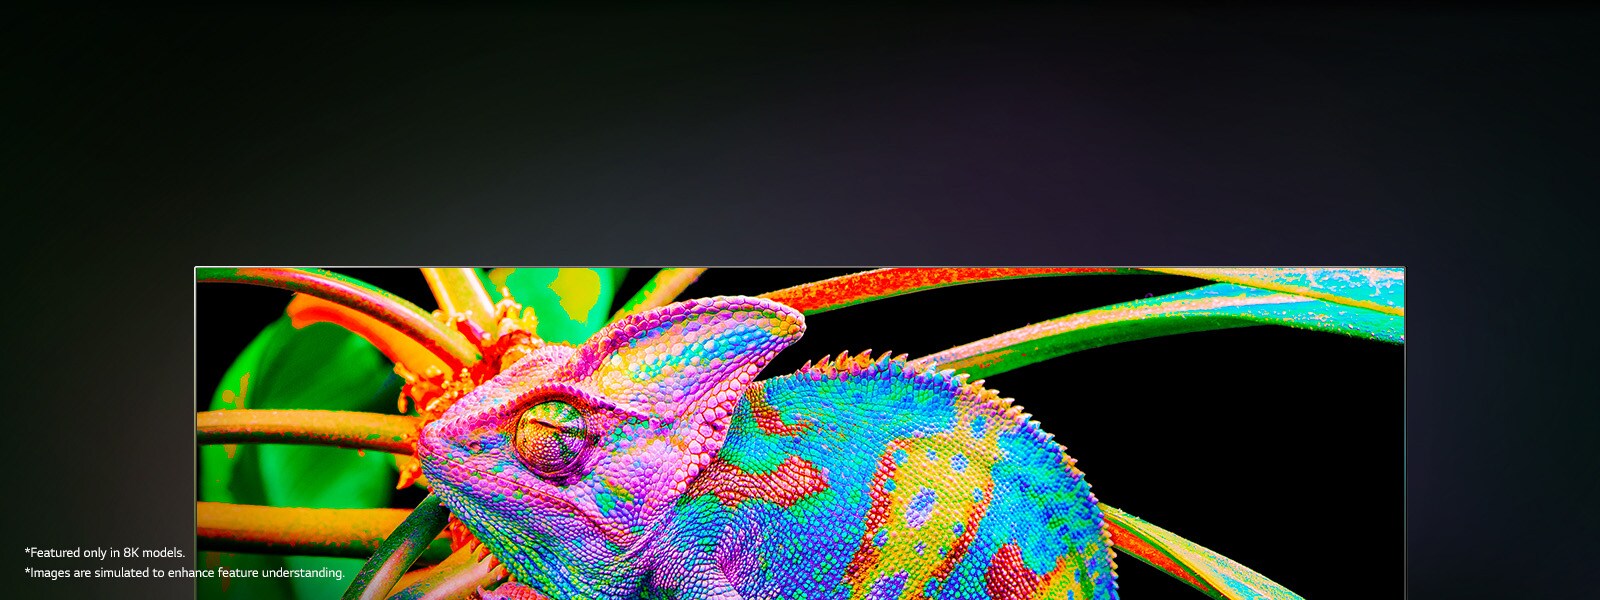 There is a TV where colorful chameleons are zoomed in to show the skin in detail.